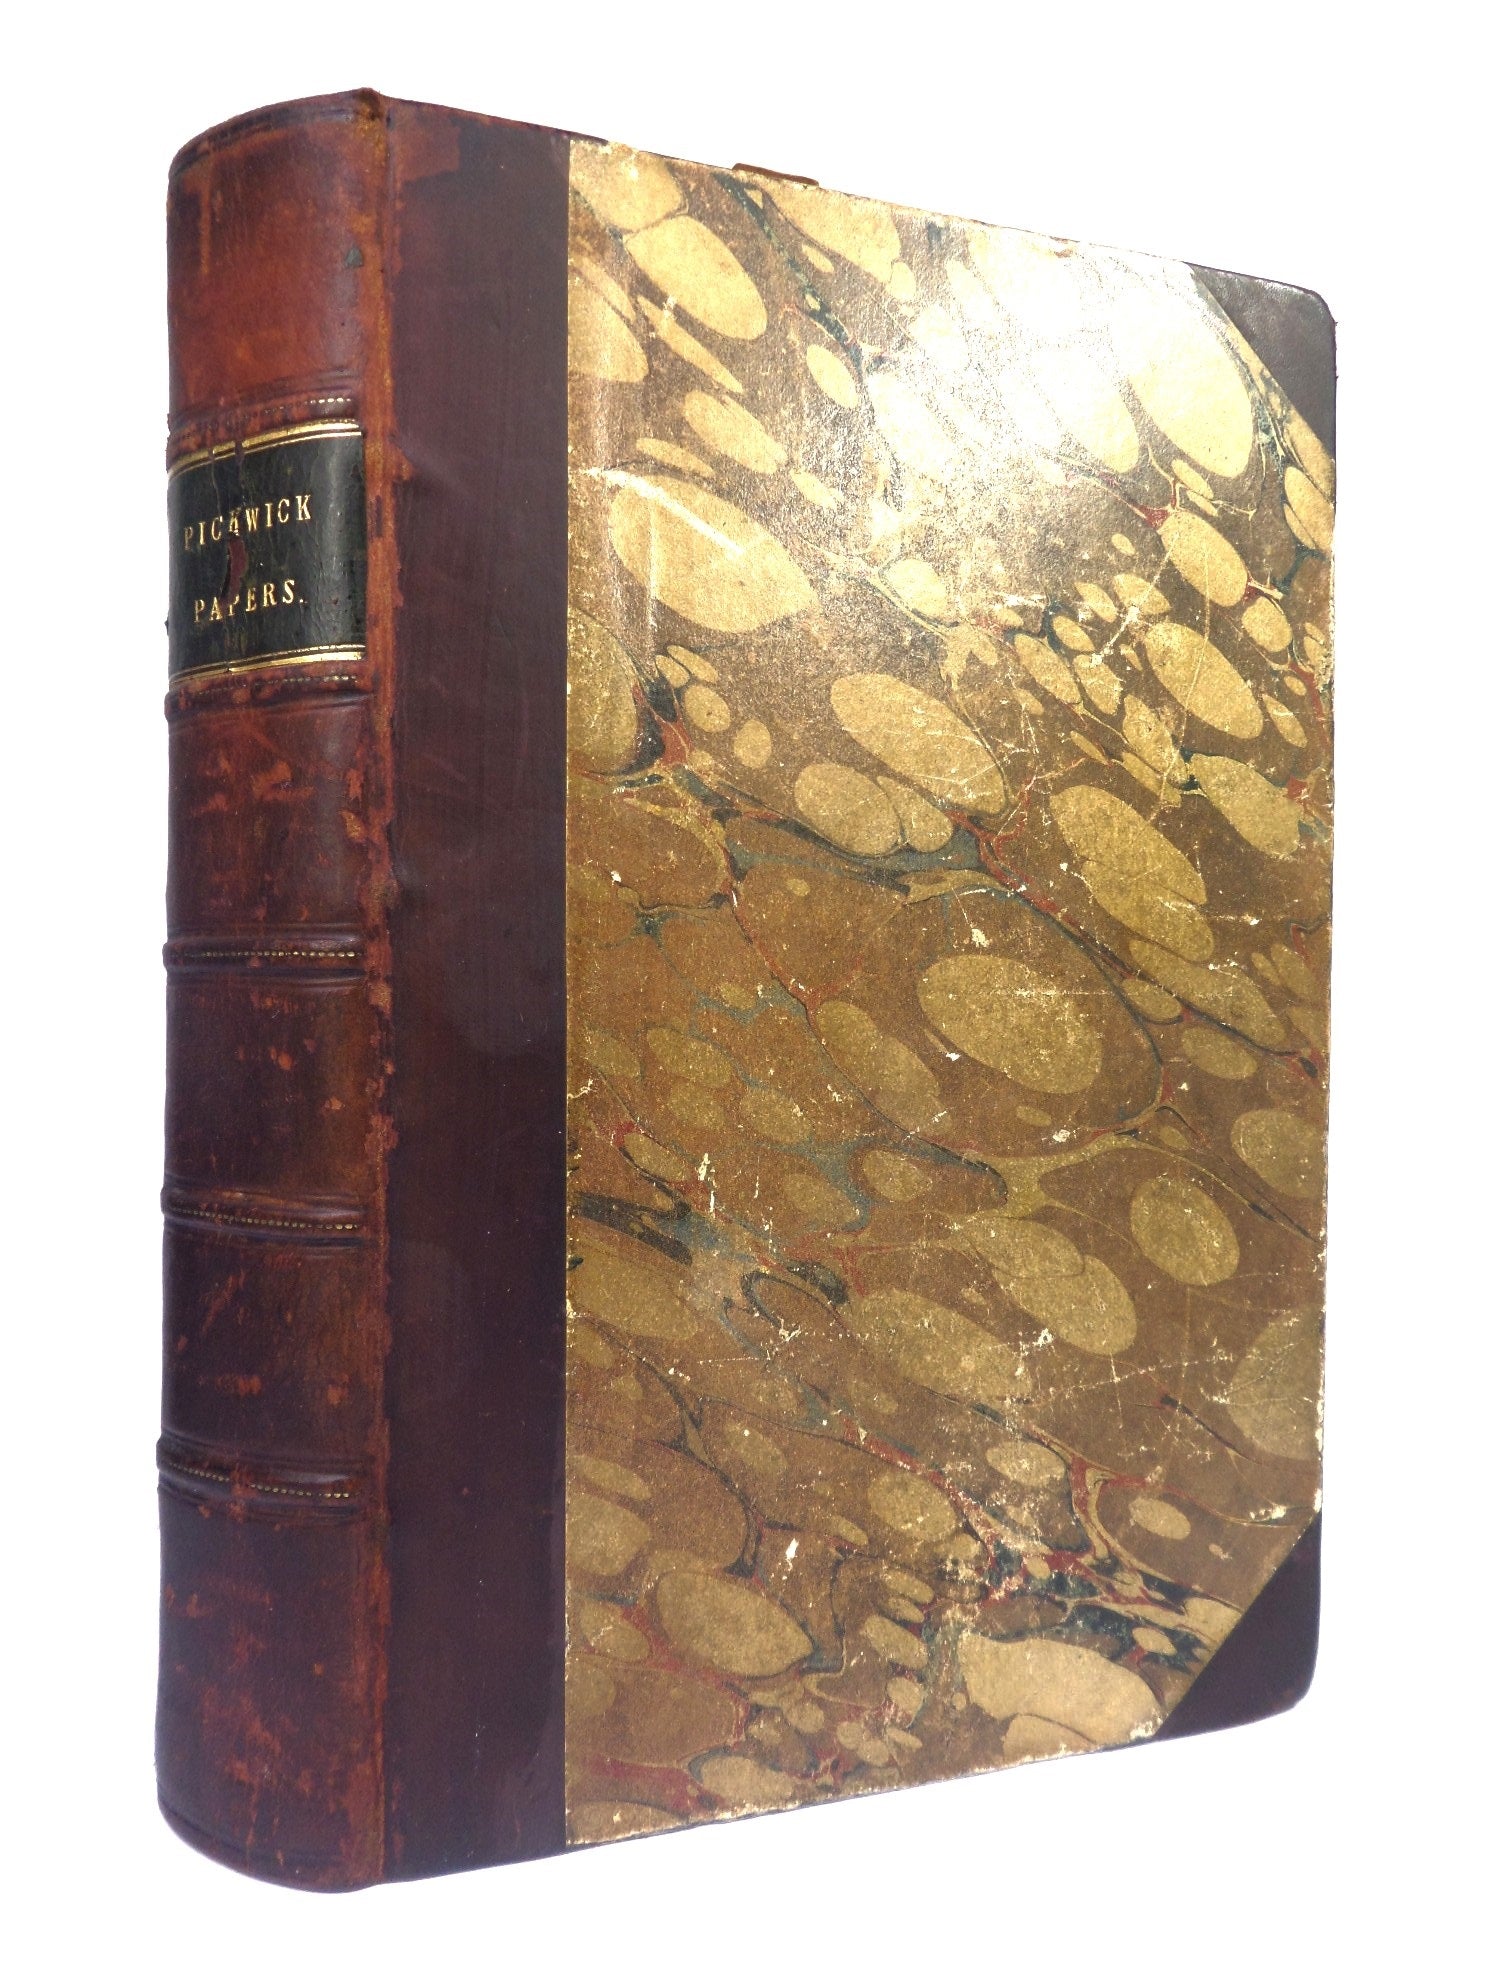 THE PICKWICK PAPERS BY CHARLES DICKENS 1847 LEATHER BINDING